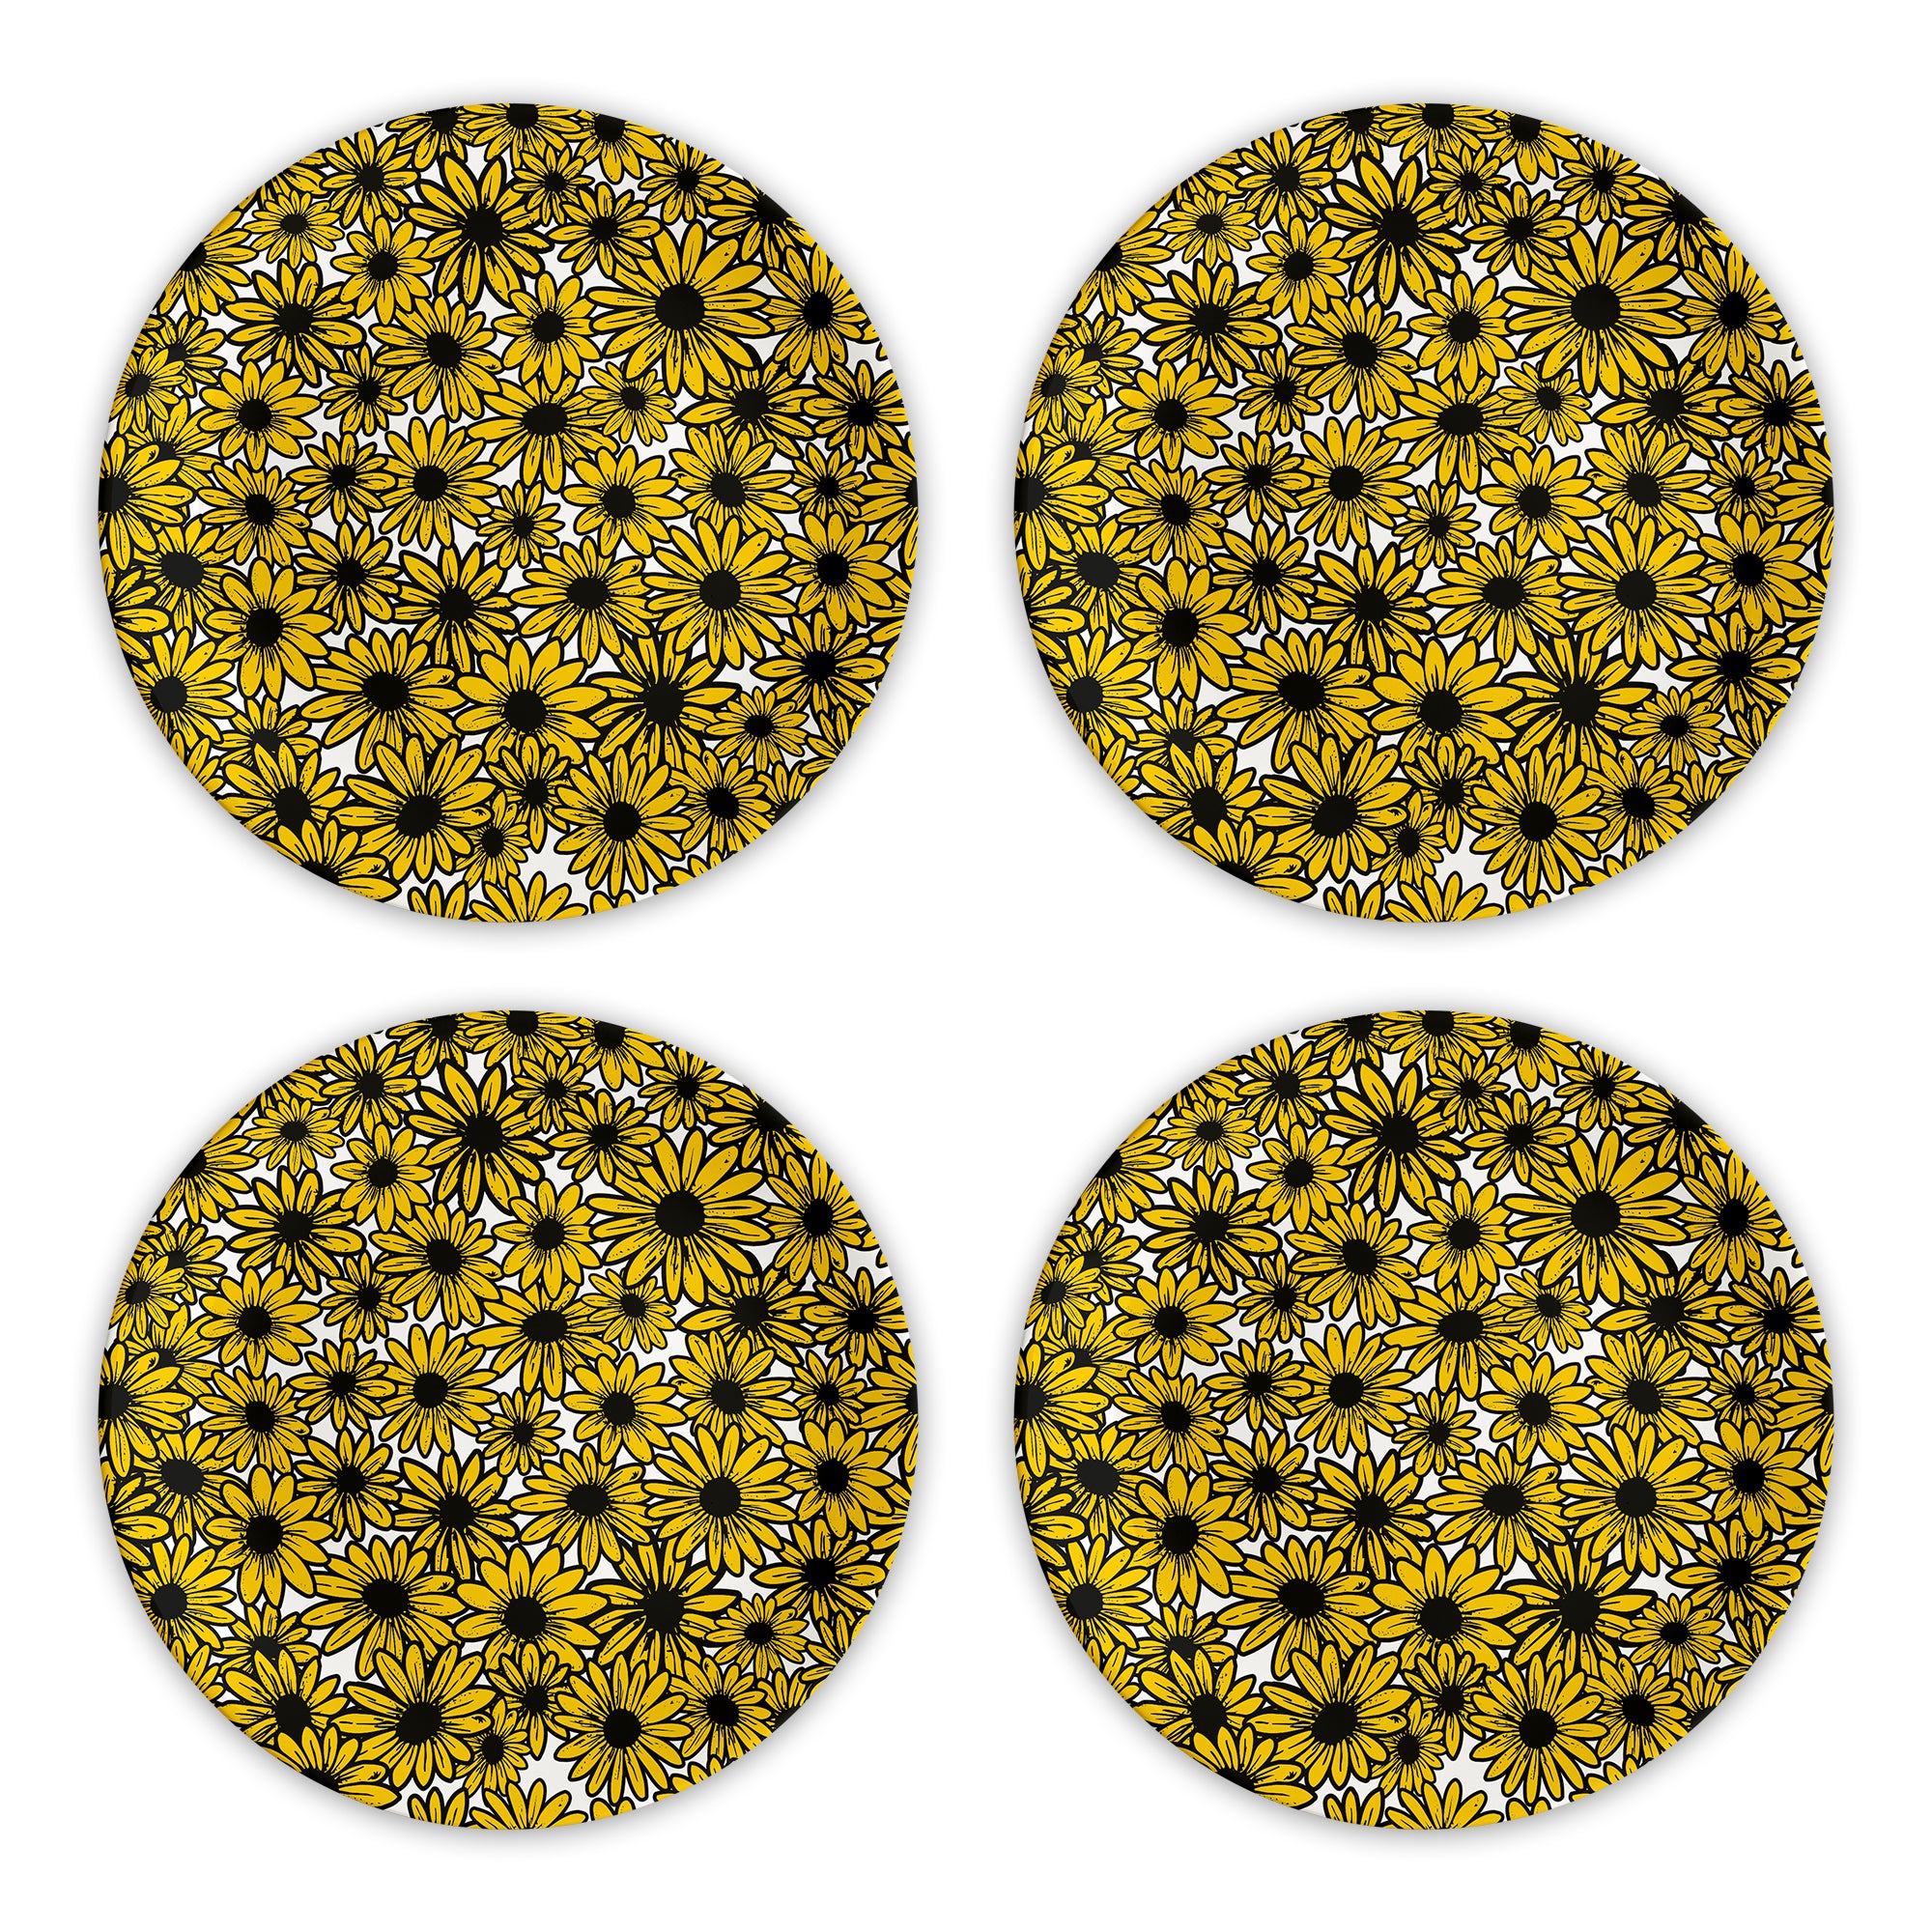 Full Black Eyed Susan / Plate - Route One Apparel